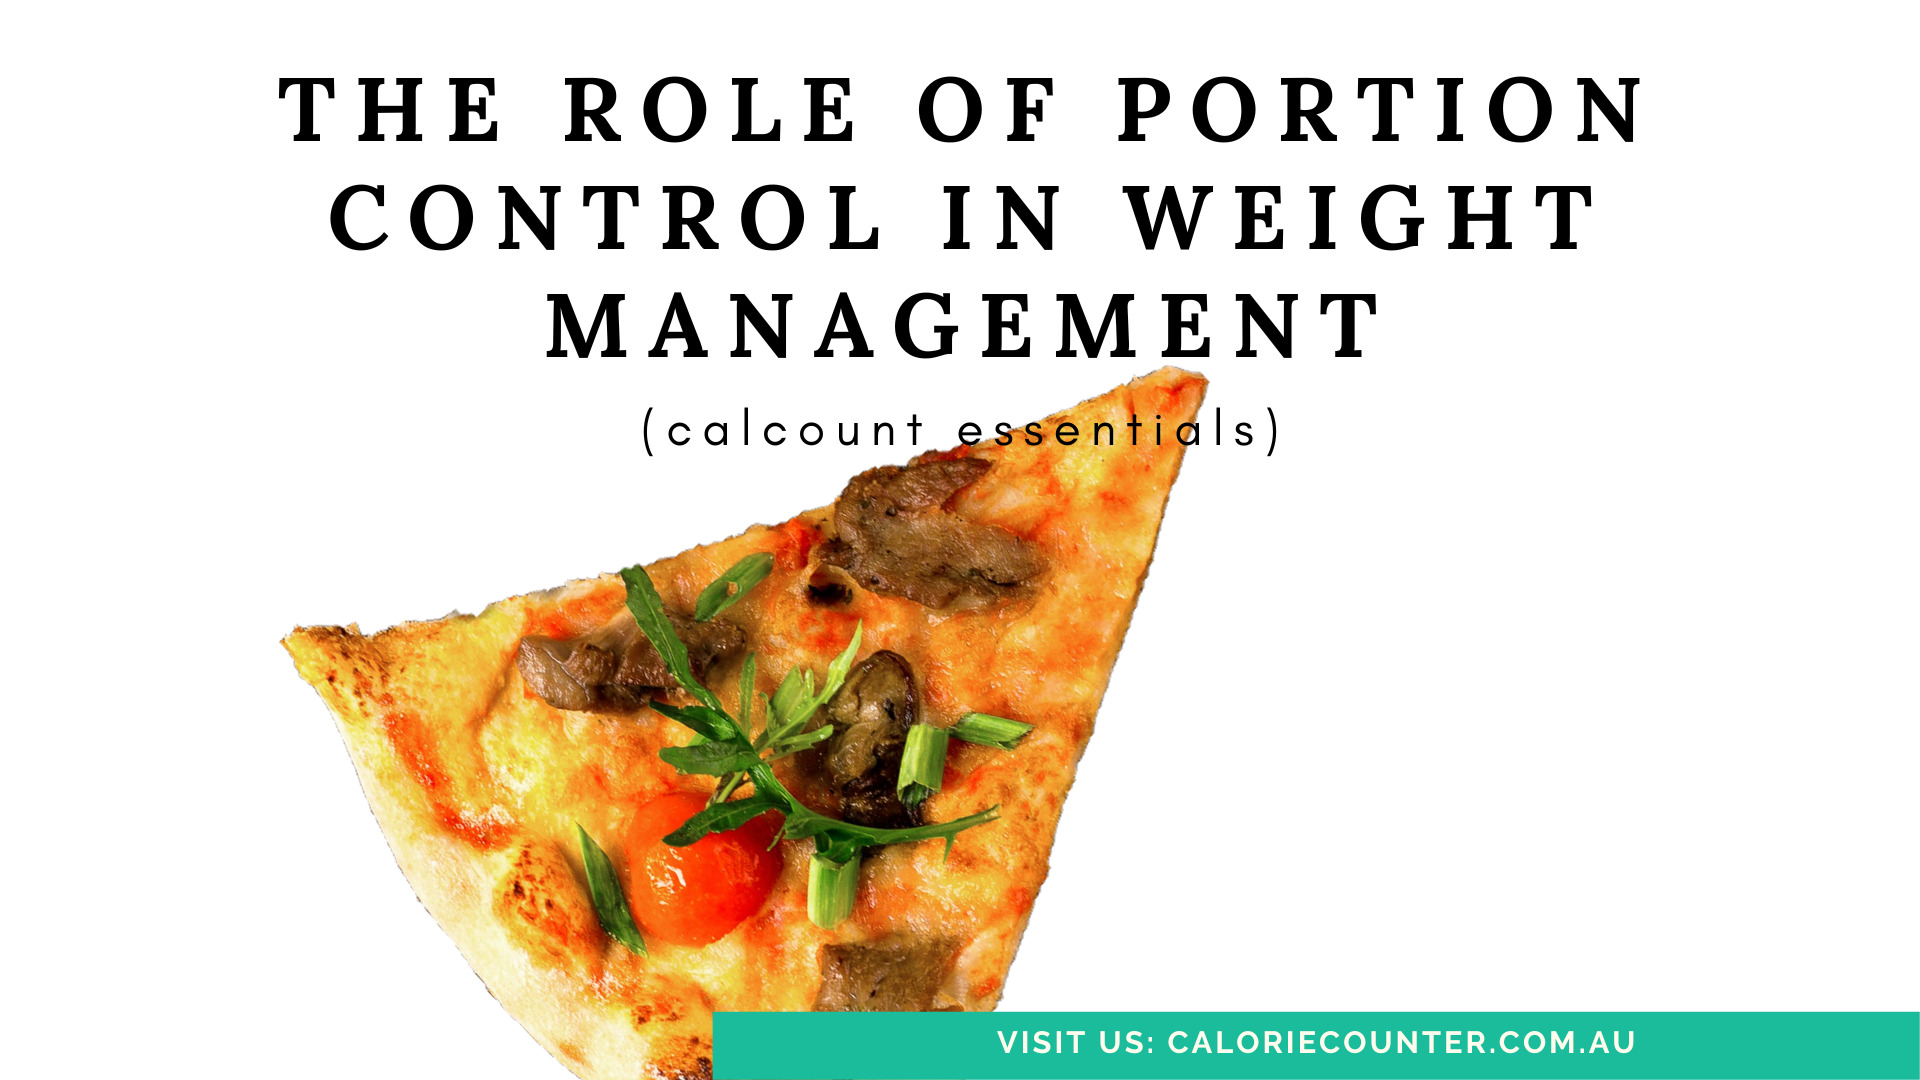 https://www.caloriecounter.com.au/wp-content/uploads/2023/02/The-role-of-portion-control-in-weight-management.jpg